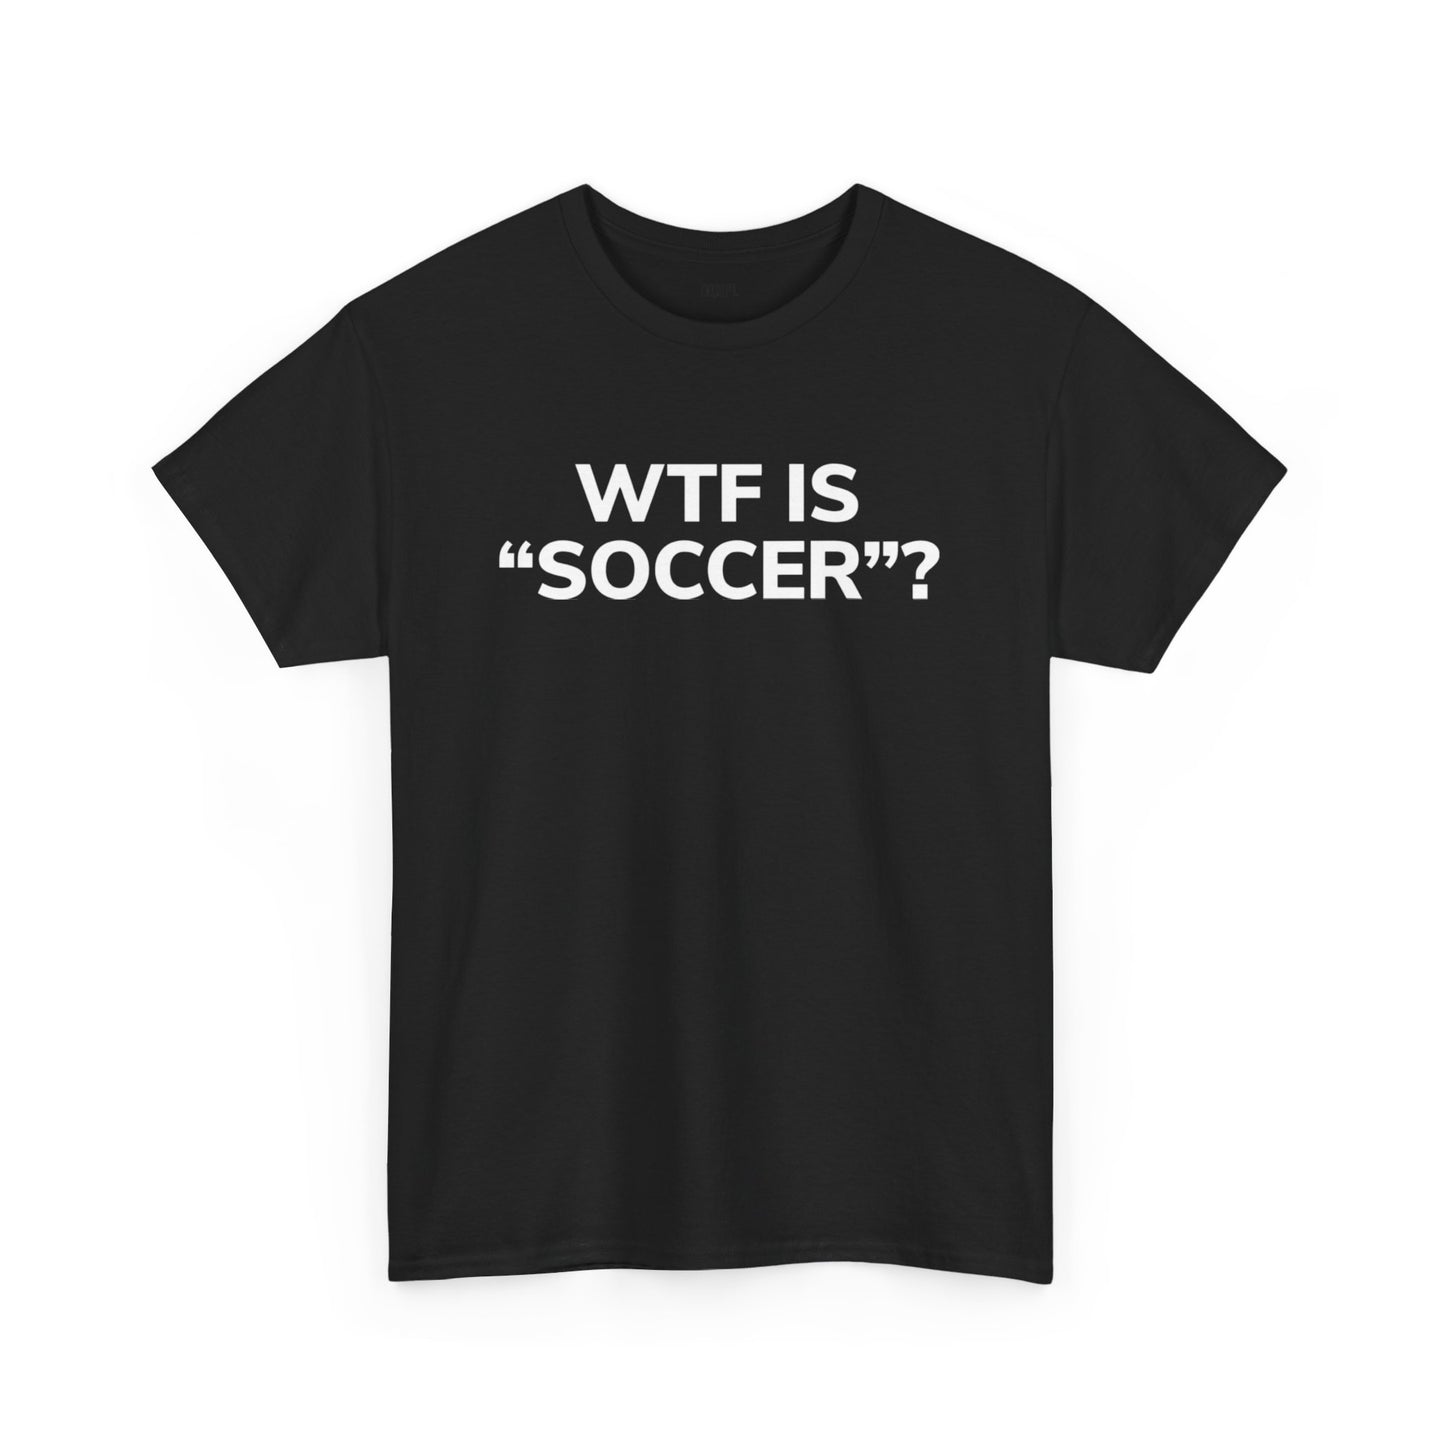 WTF IS "SOCCER"? (T - SHIRT)